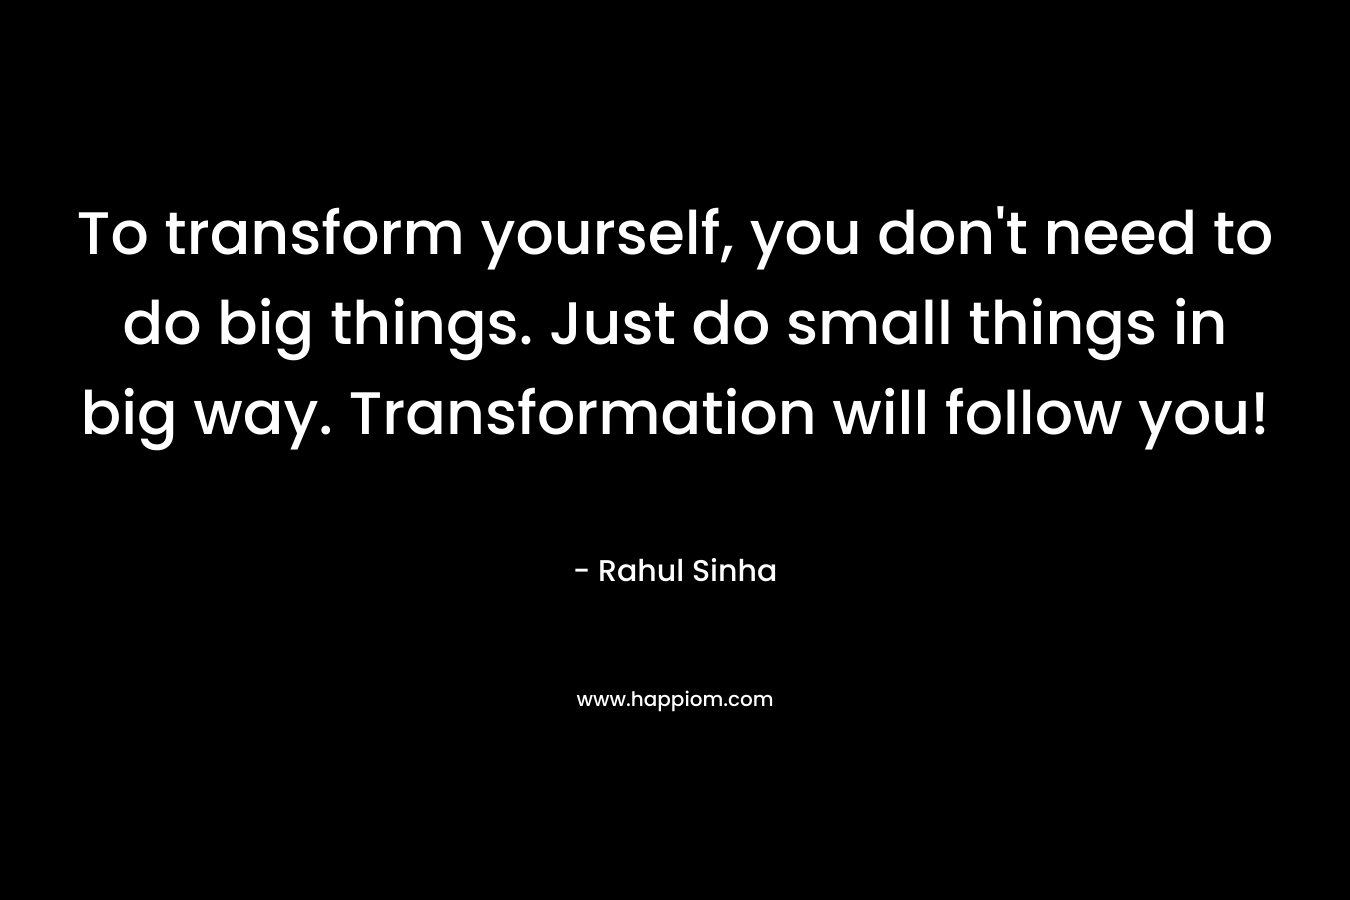 To transform yourself, you don’t need to do big things. Just do small things in big way. Transformation will follow you! – Rahul Sinha